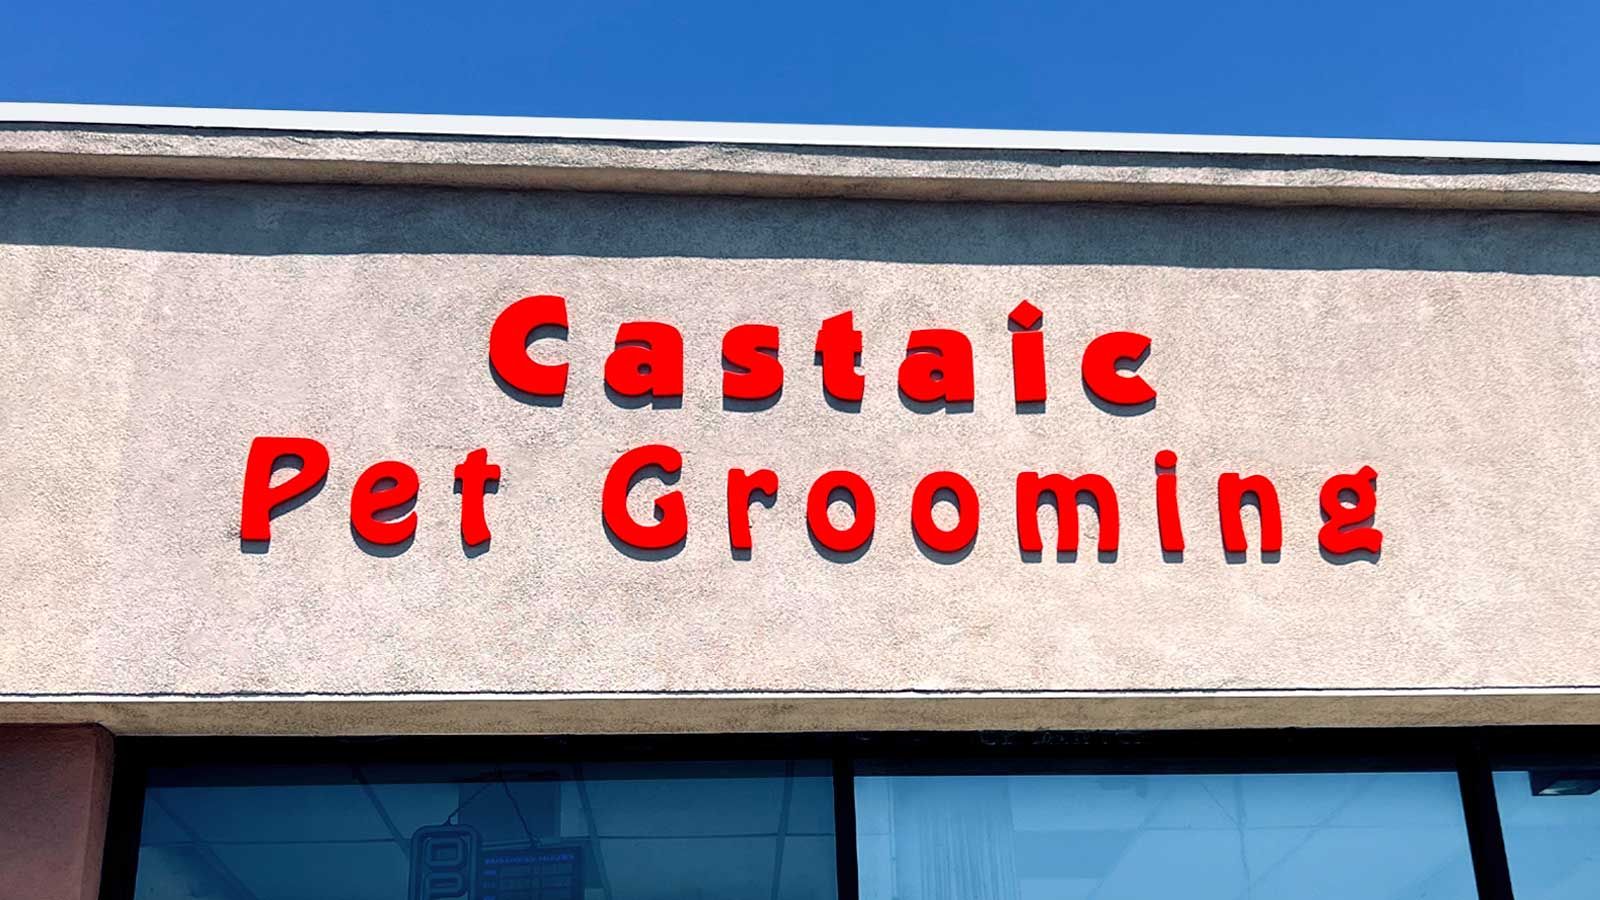 Castaic Pet Grooming 3D letters on the building